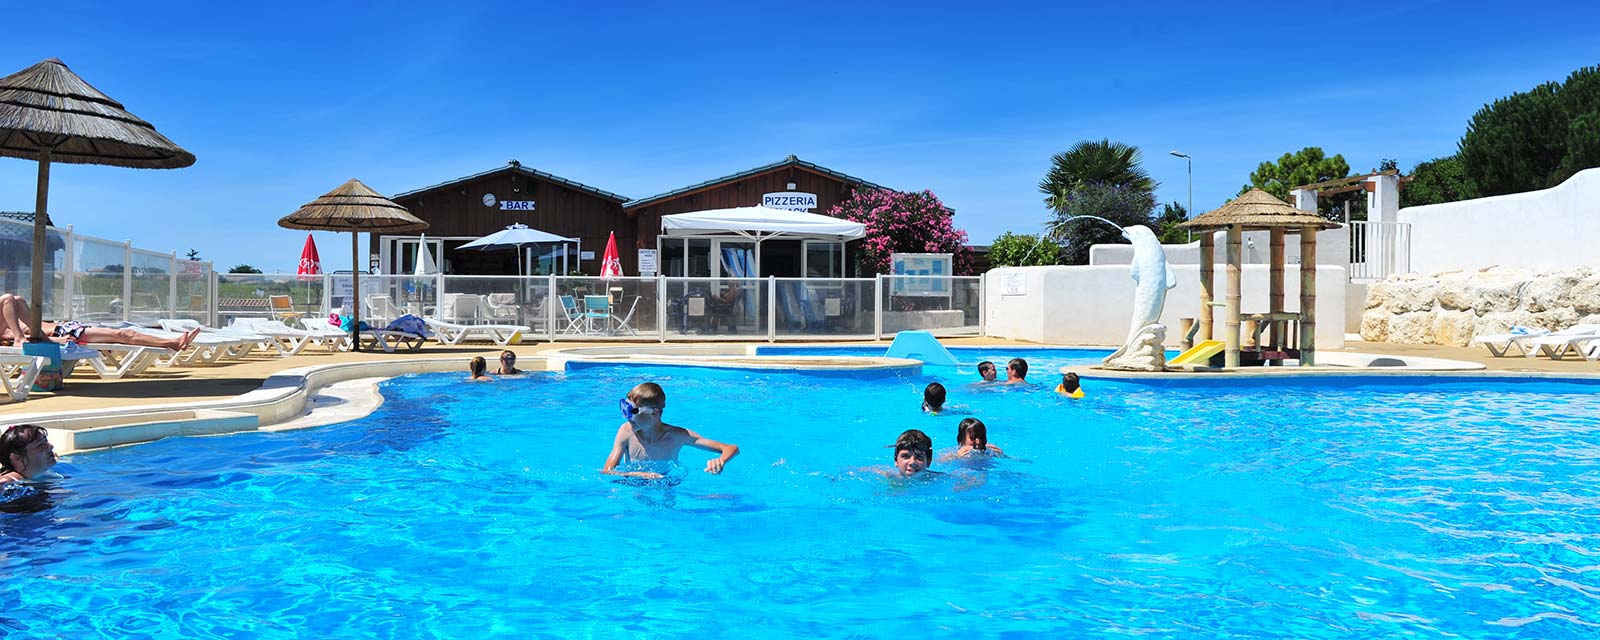 Basin of the aquatic area of the campsite in Charente Maritime